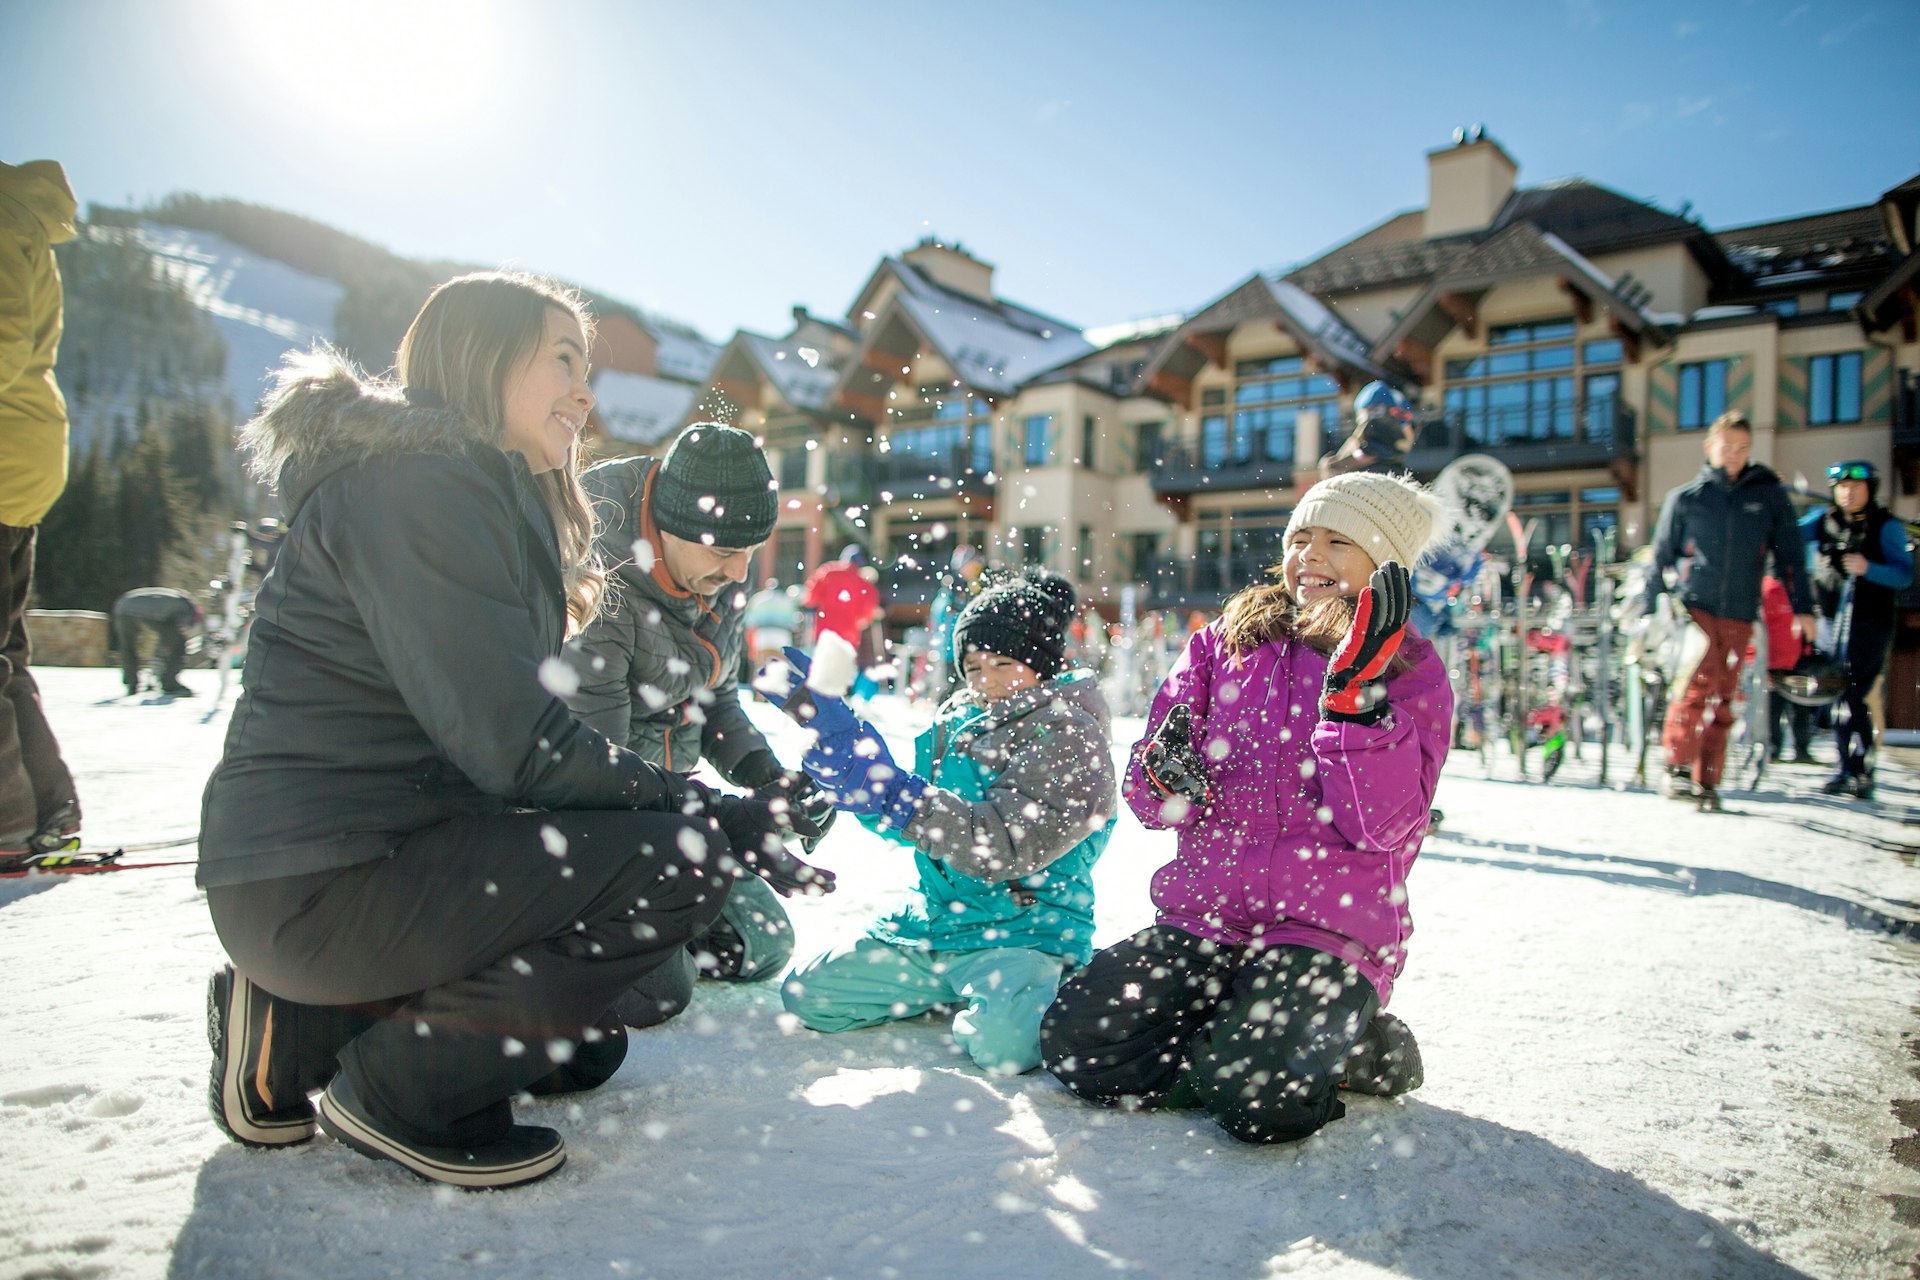 A family playing in the snow at a resort in Vail, Colorado, USA